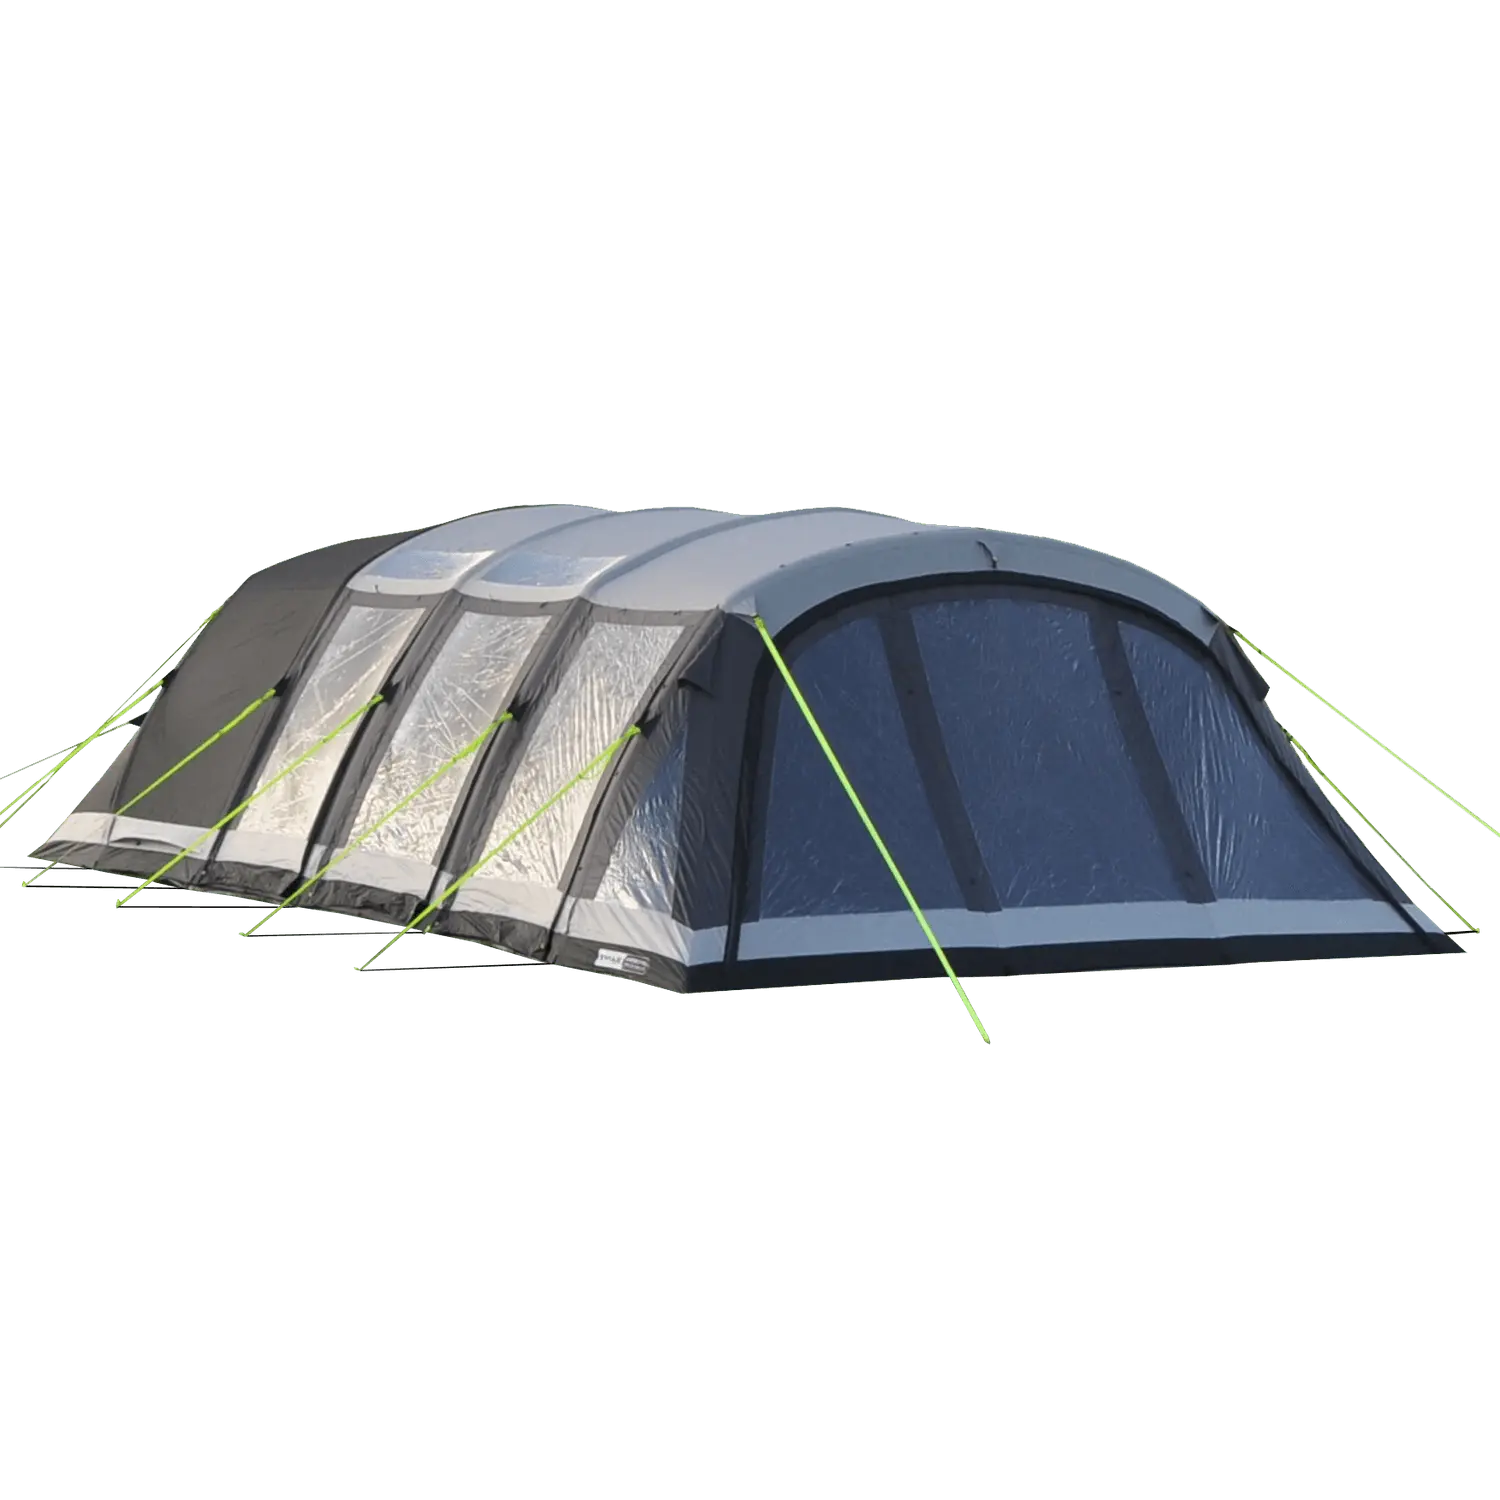 AirTek 8 Pro Inflatable Tent - 8 Man Tent *2023 EARLY RELEASE* on white background